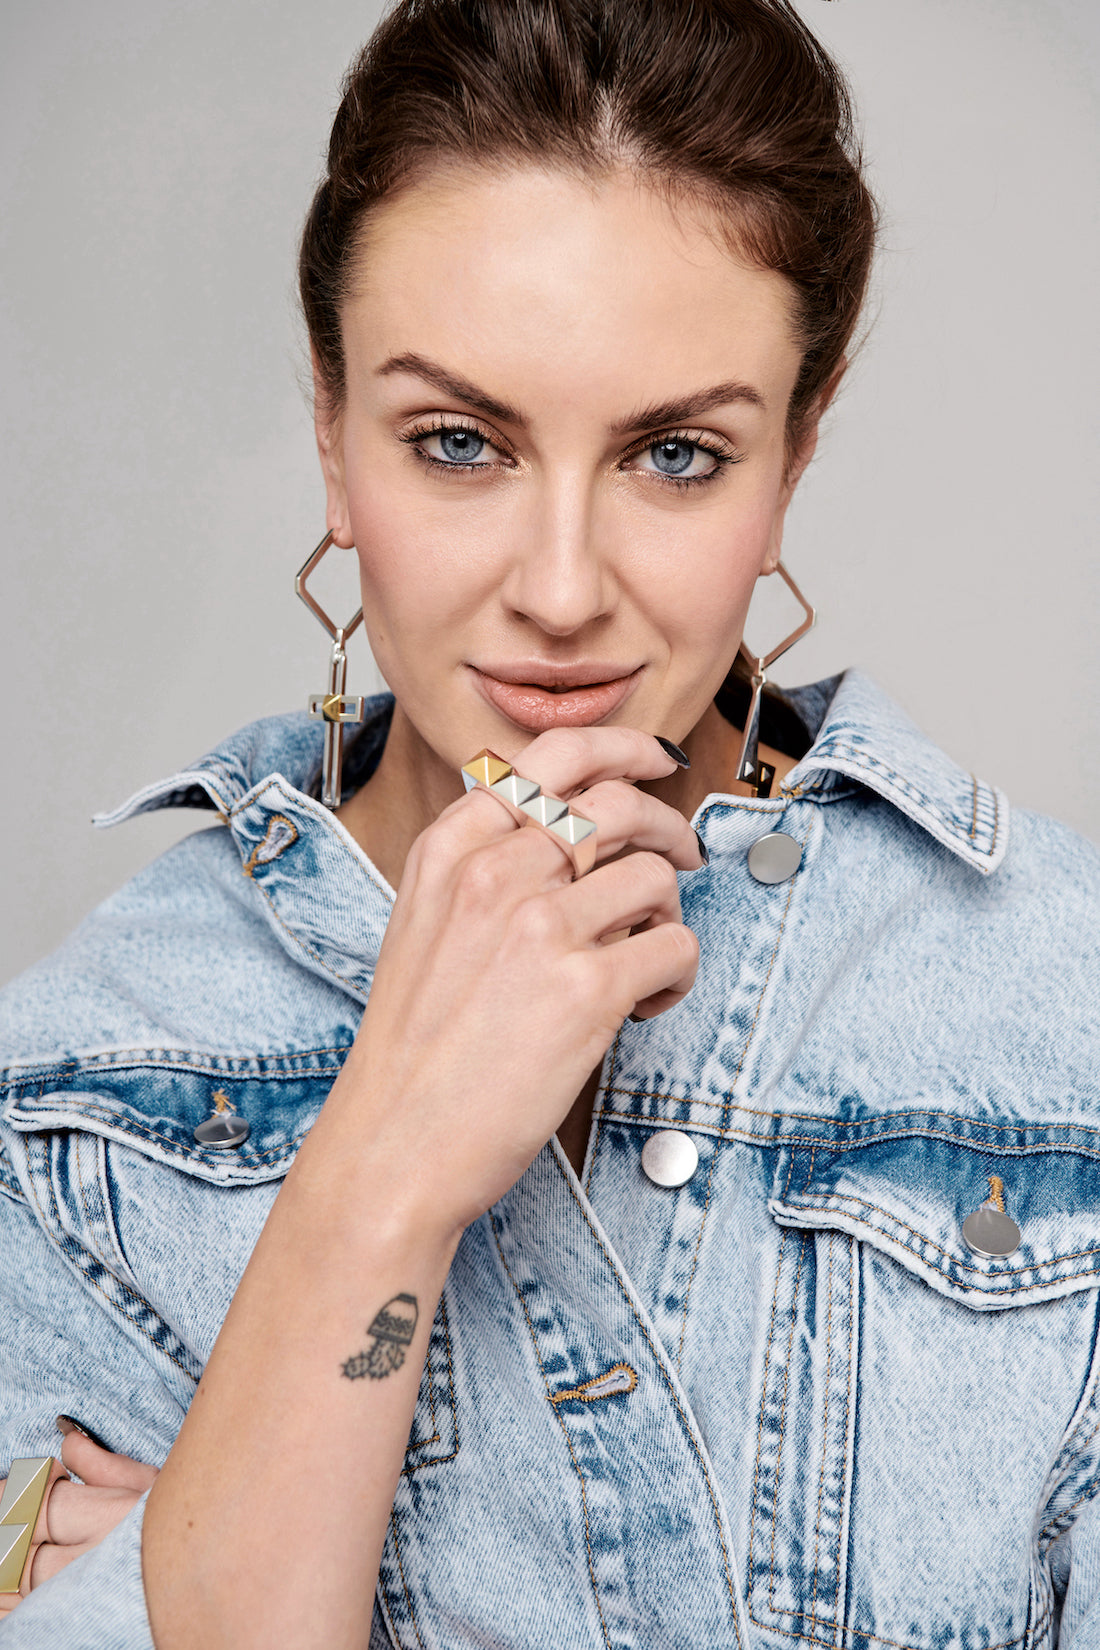 Close up image of Cirkl statement accessories featuring sterling silver and 18k gold mixed metals. Model looking straight at the camera with hands framing her face to help feature the jewellery. Styled with an oversized denim jacket and hair pulled back t